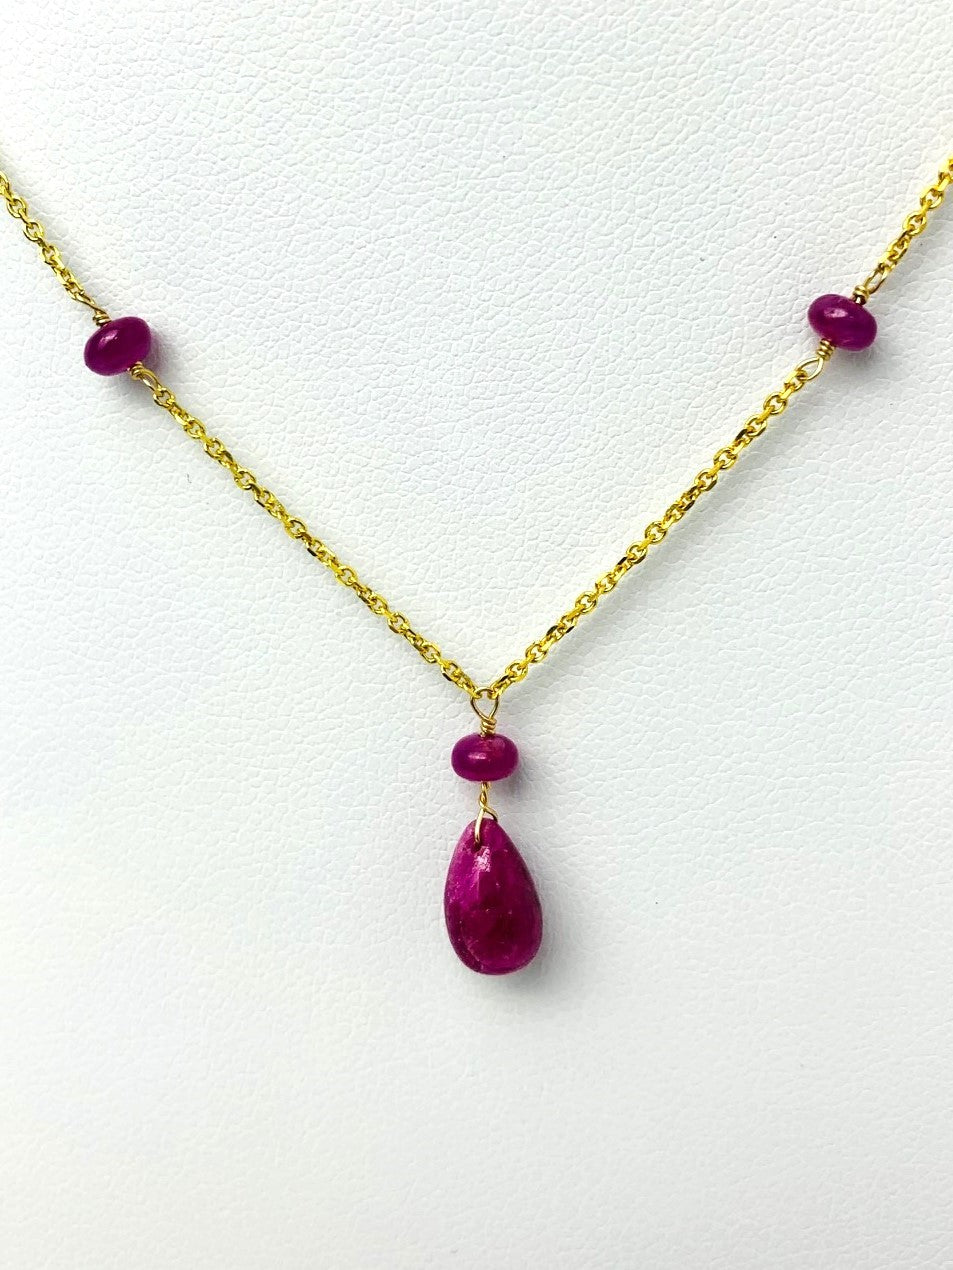 16" Ruby Station Necklace With Center Drop in 14KY - NCK-498-DRPGM14Y-RBY-16